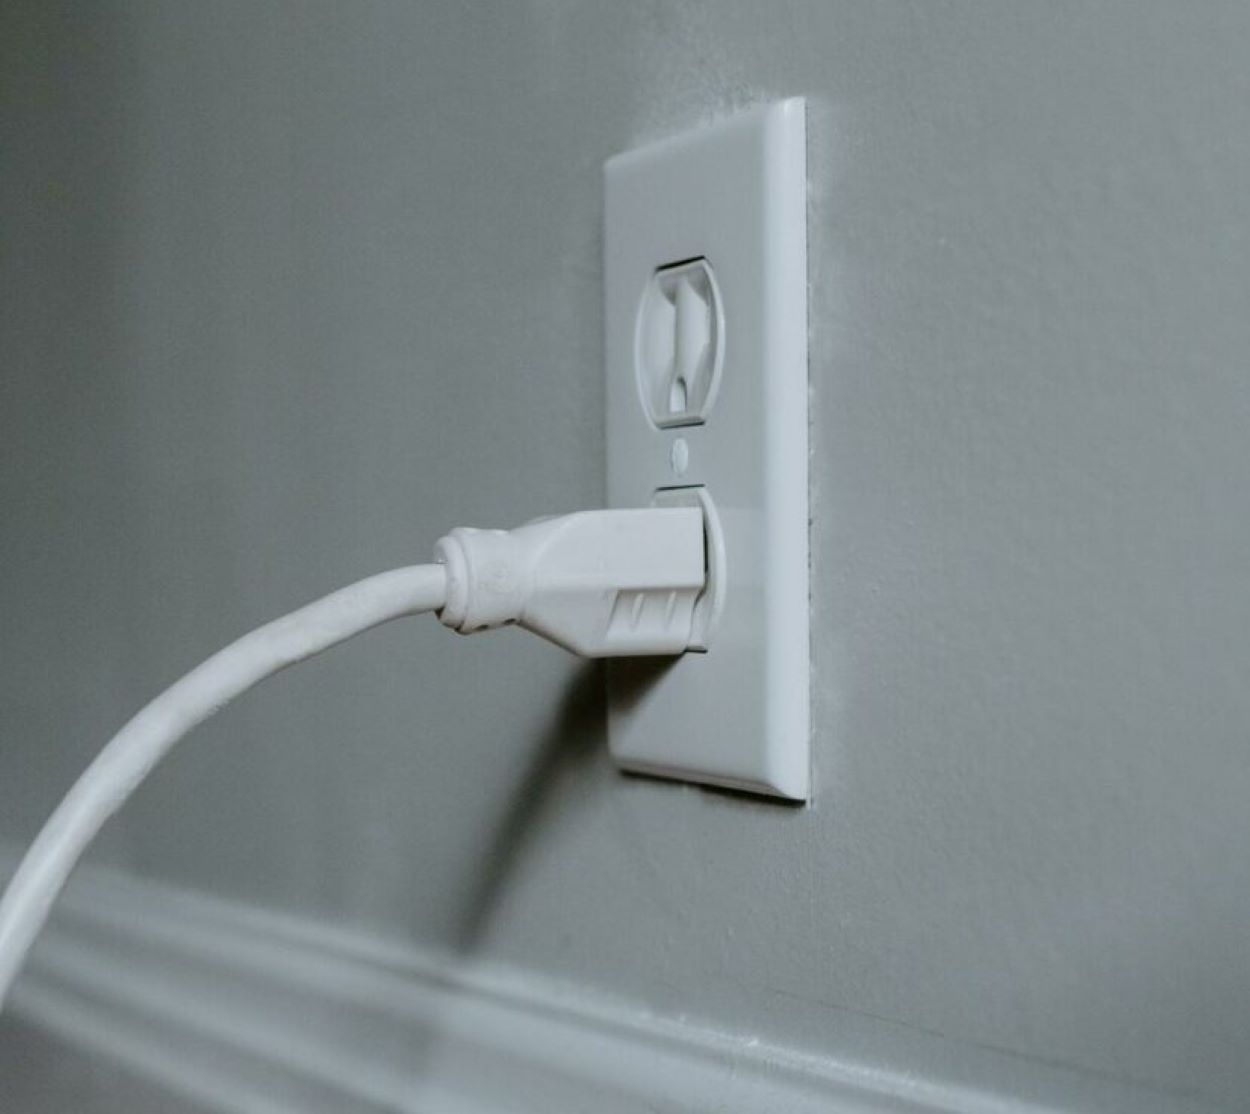 With an outlet dimmer, you can control the brightness of the light. 